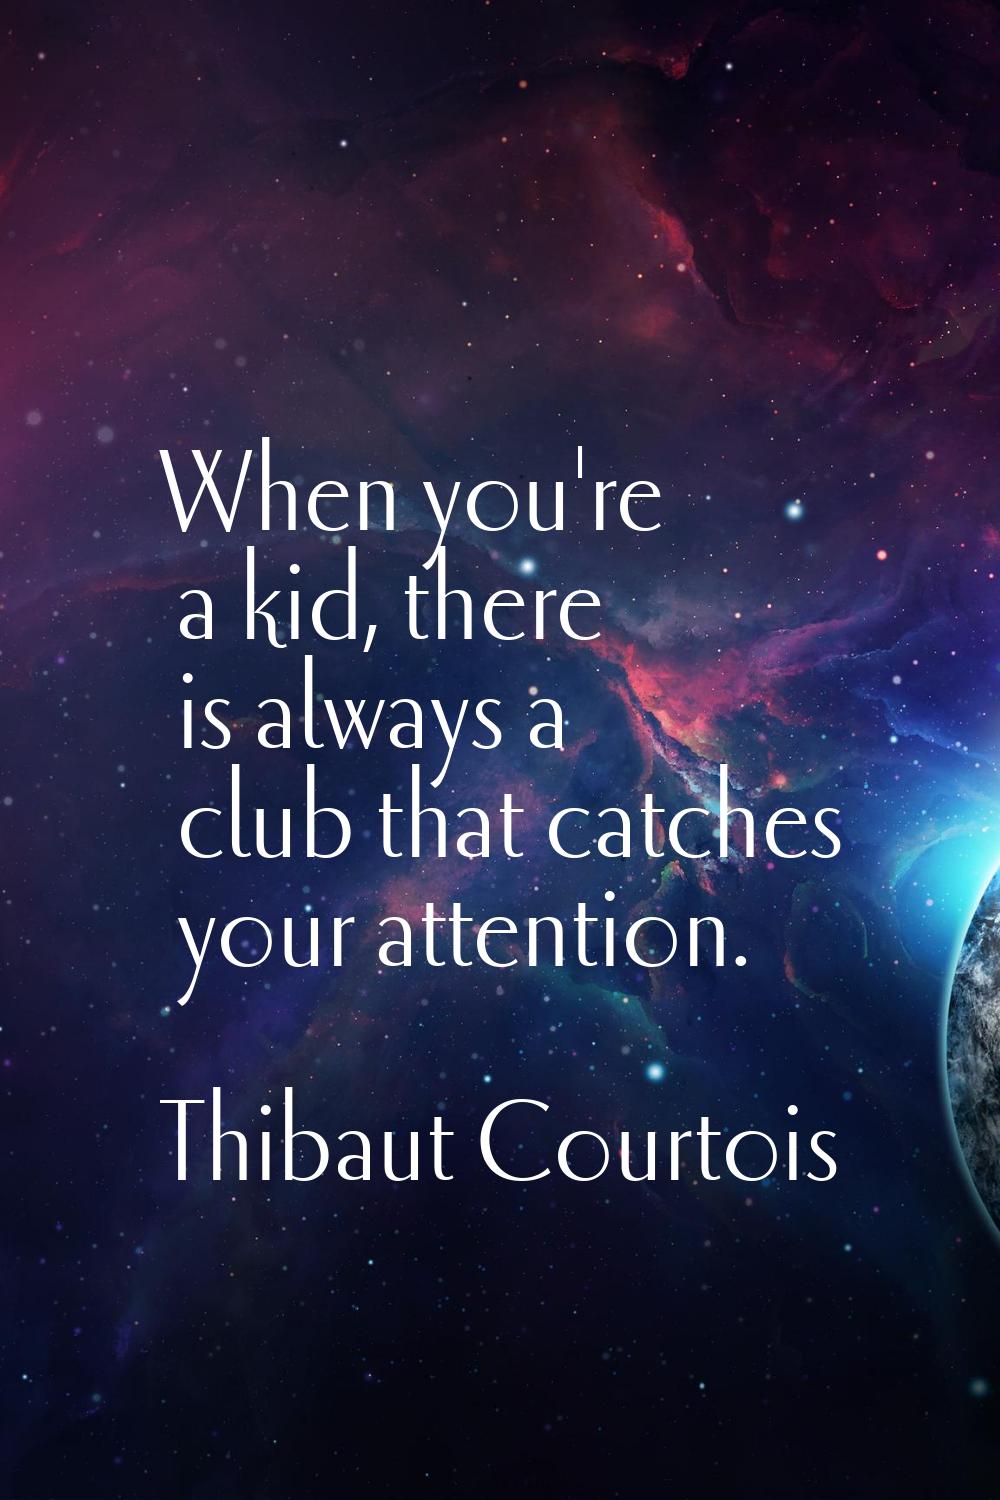 When you're a kid, there is always a club that catches your attention.